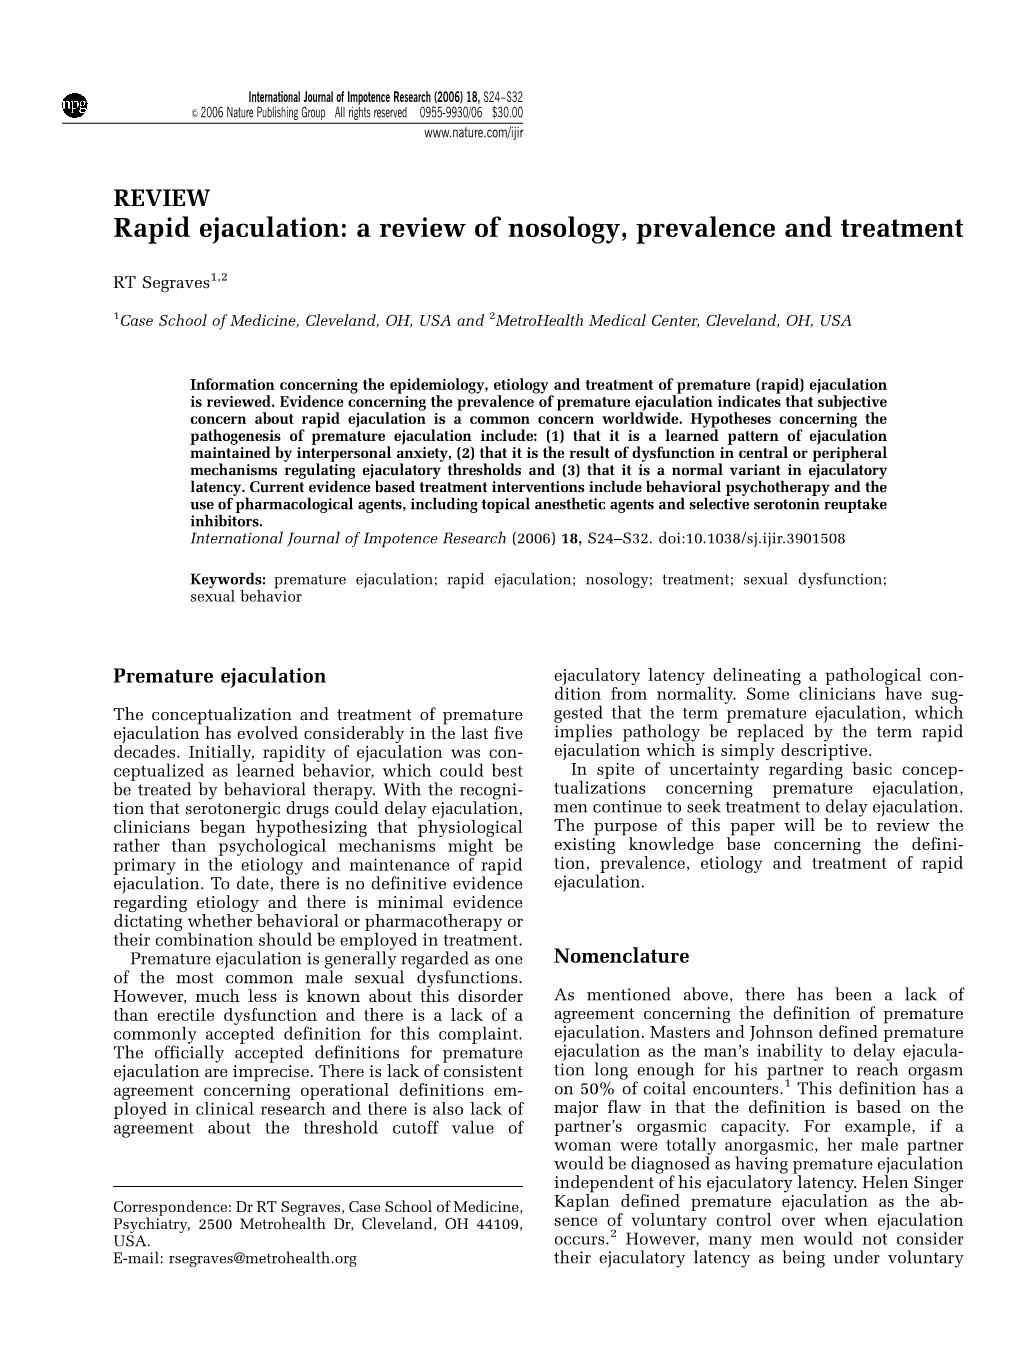 Rapid Ejaculation: a Review of Nosology, Prevalence and Treatment